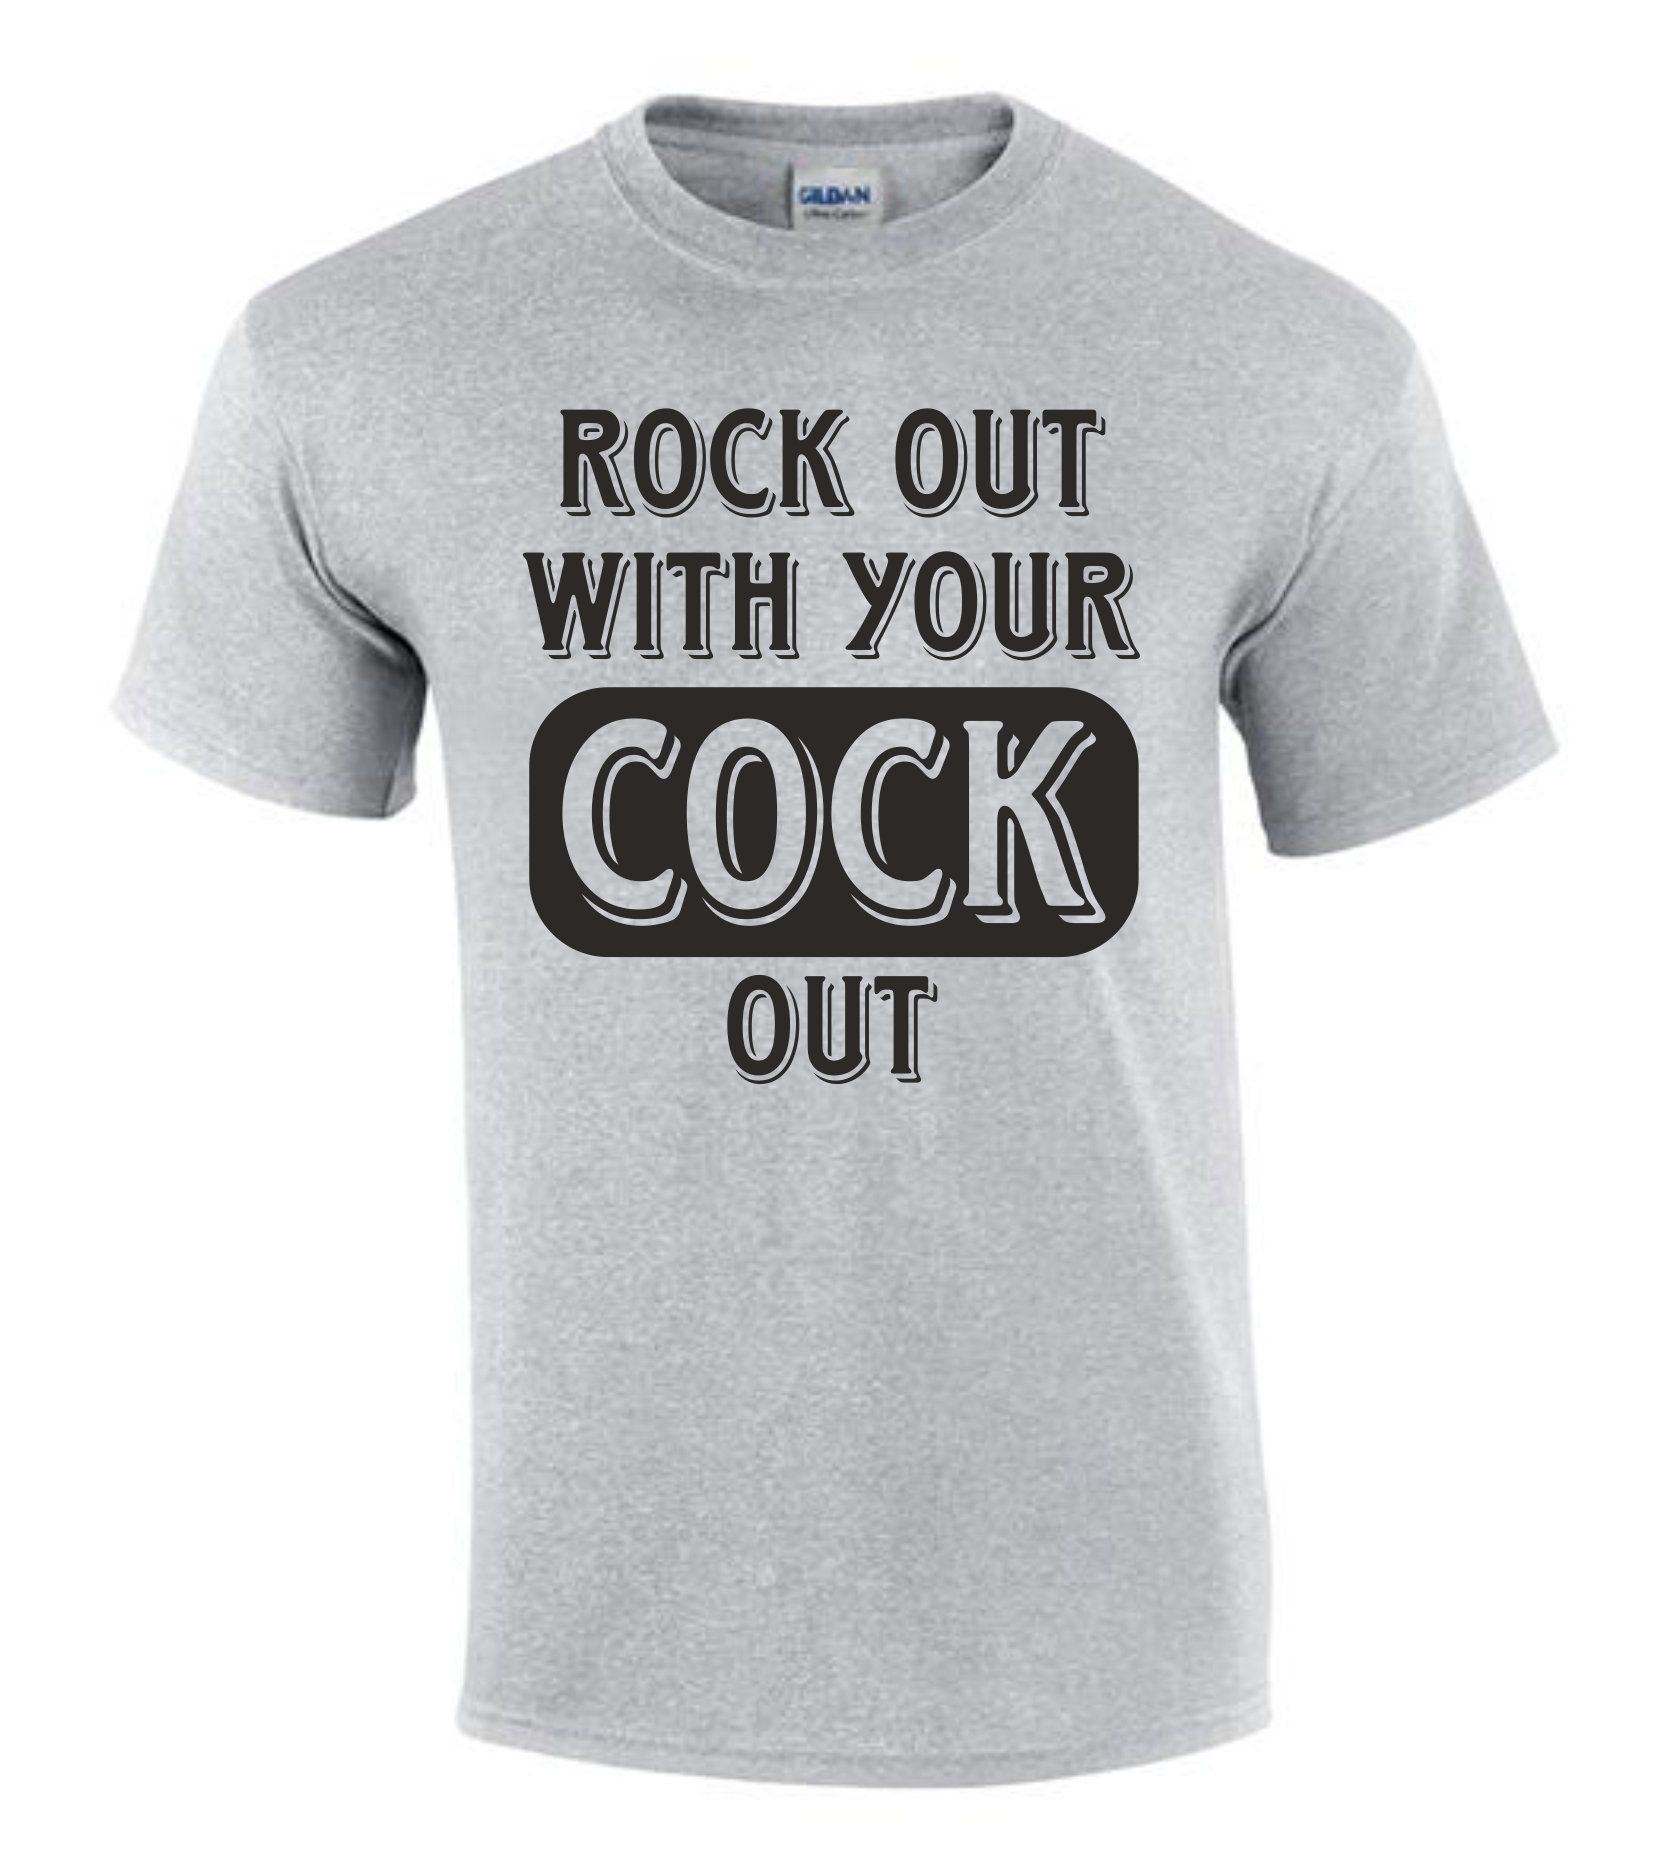 Snicky S. reccomend Rockout with your cock out